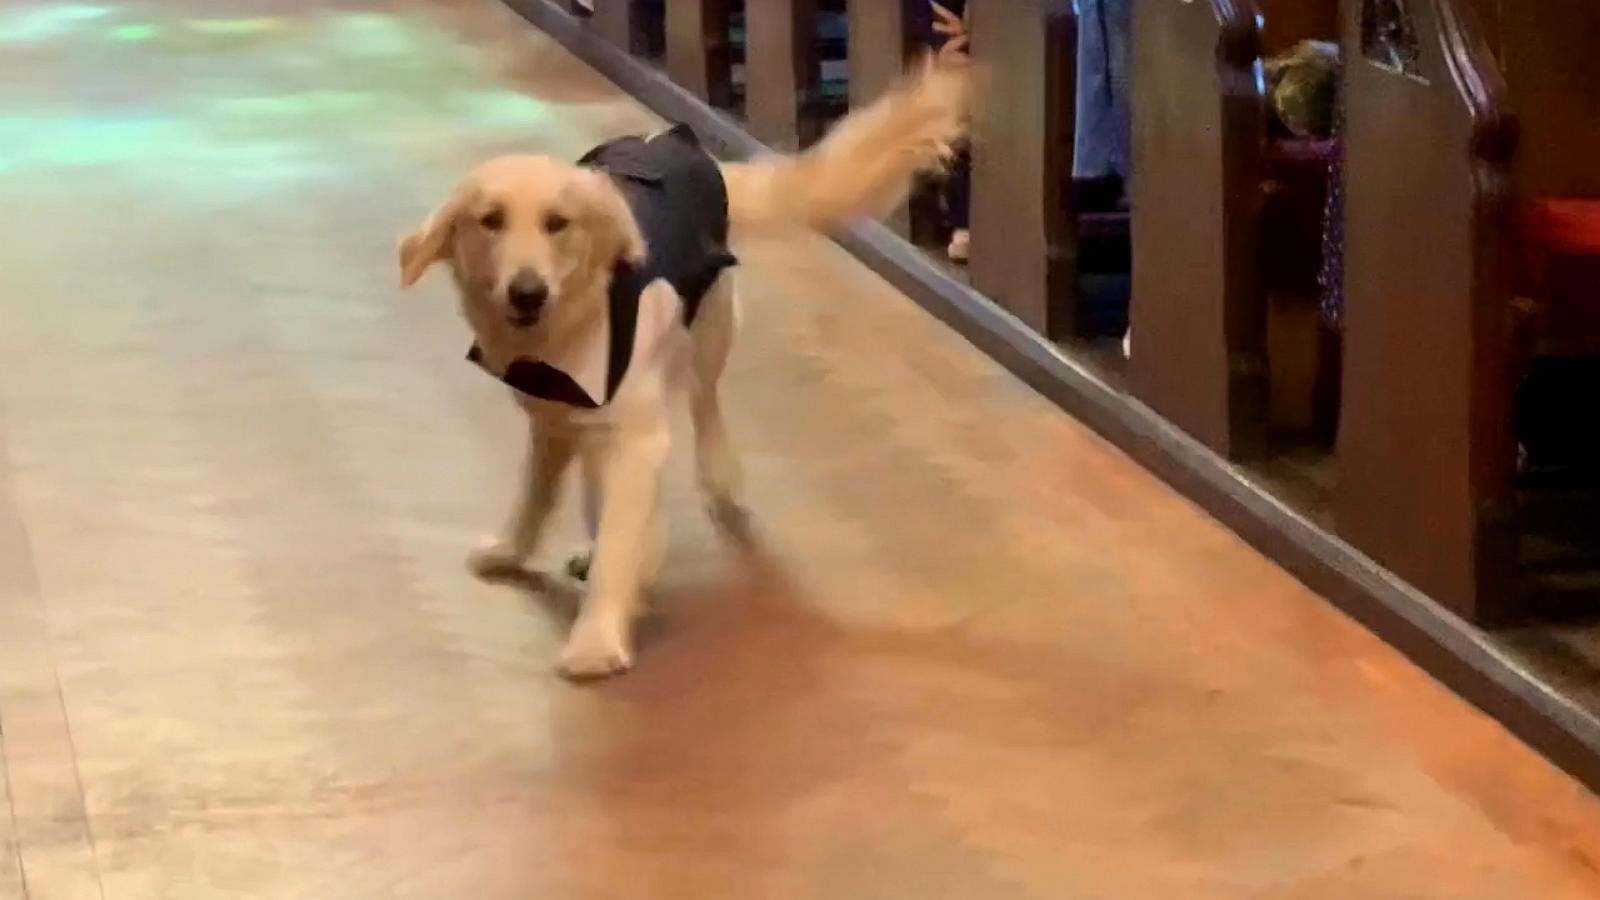 VIDEO: This golden retriever made adorable entrance as ring bearer at his owner's wedding